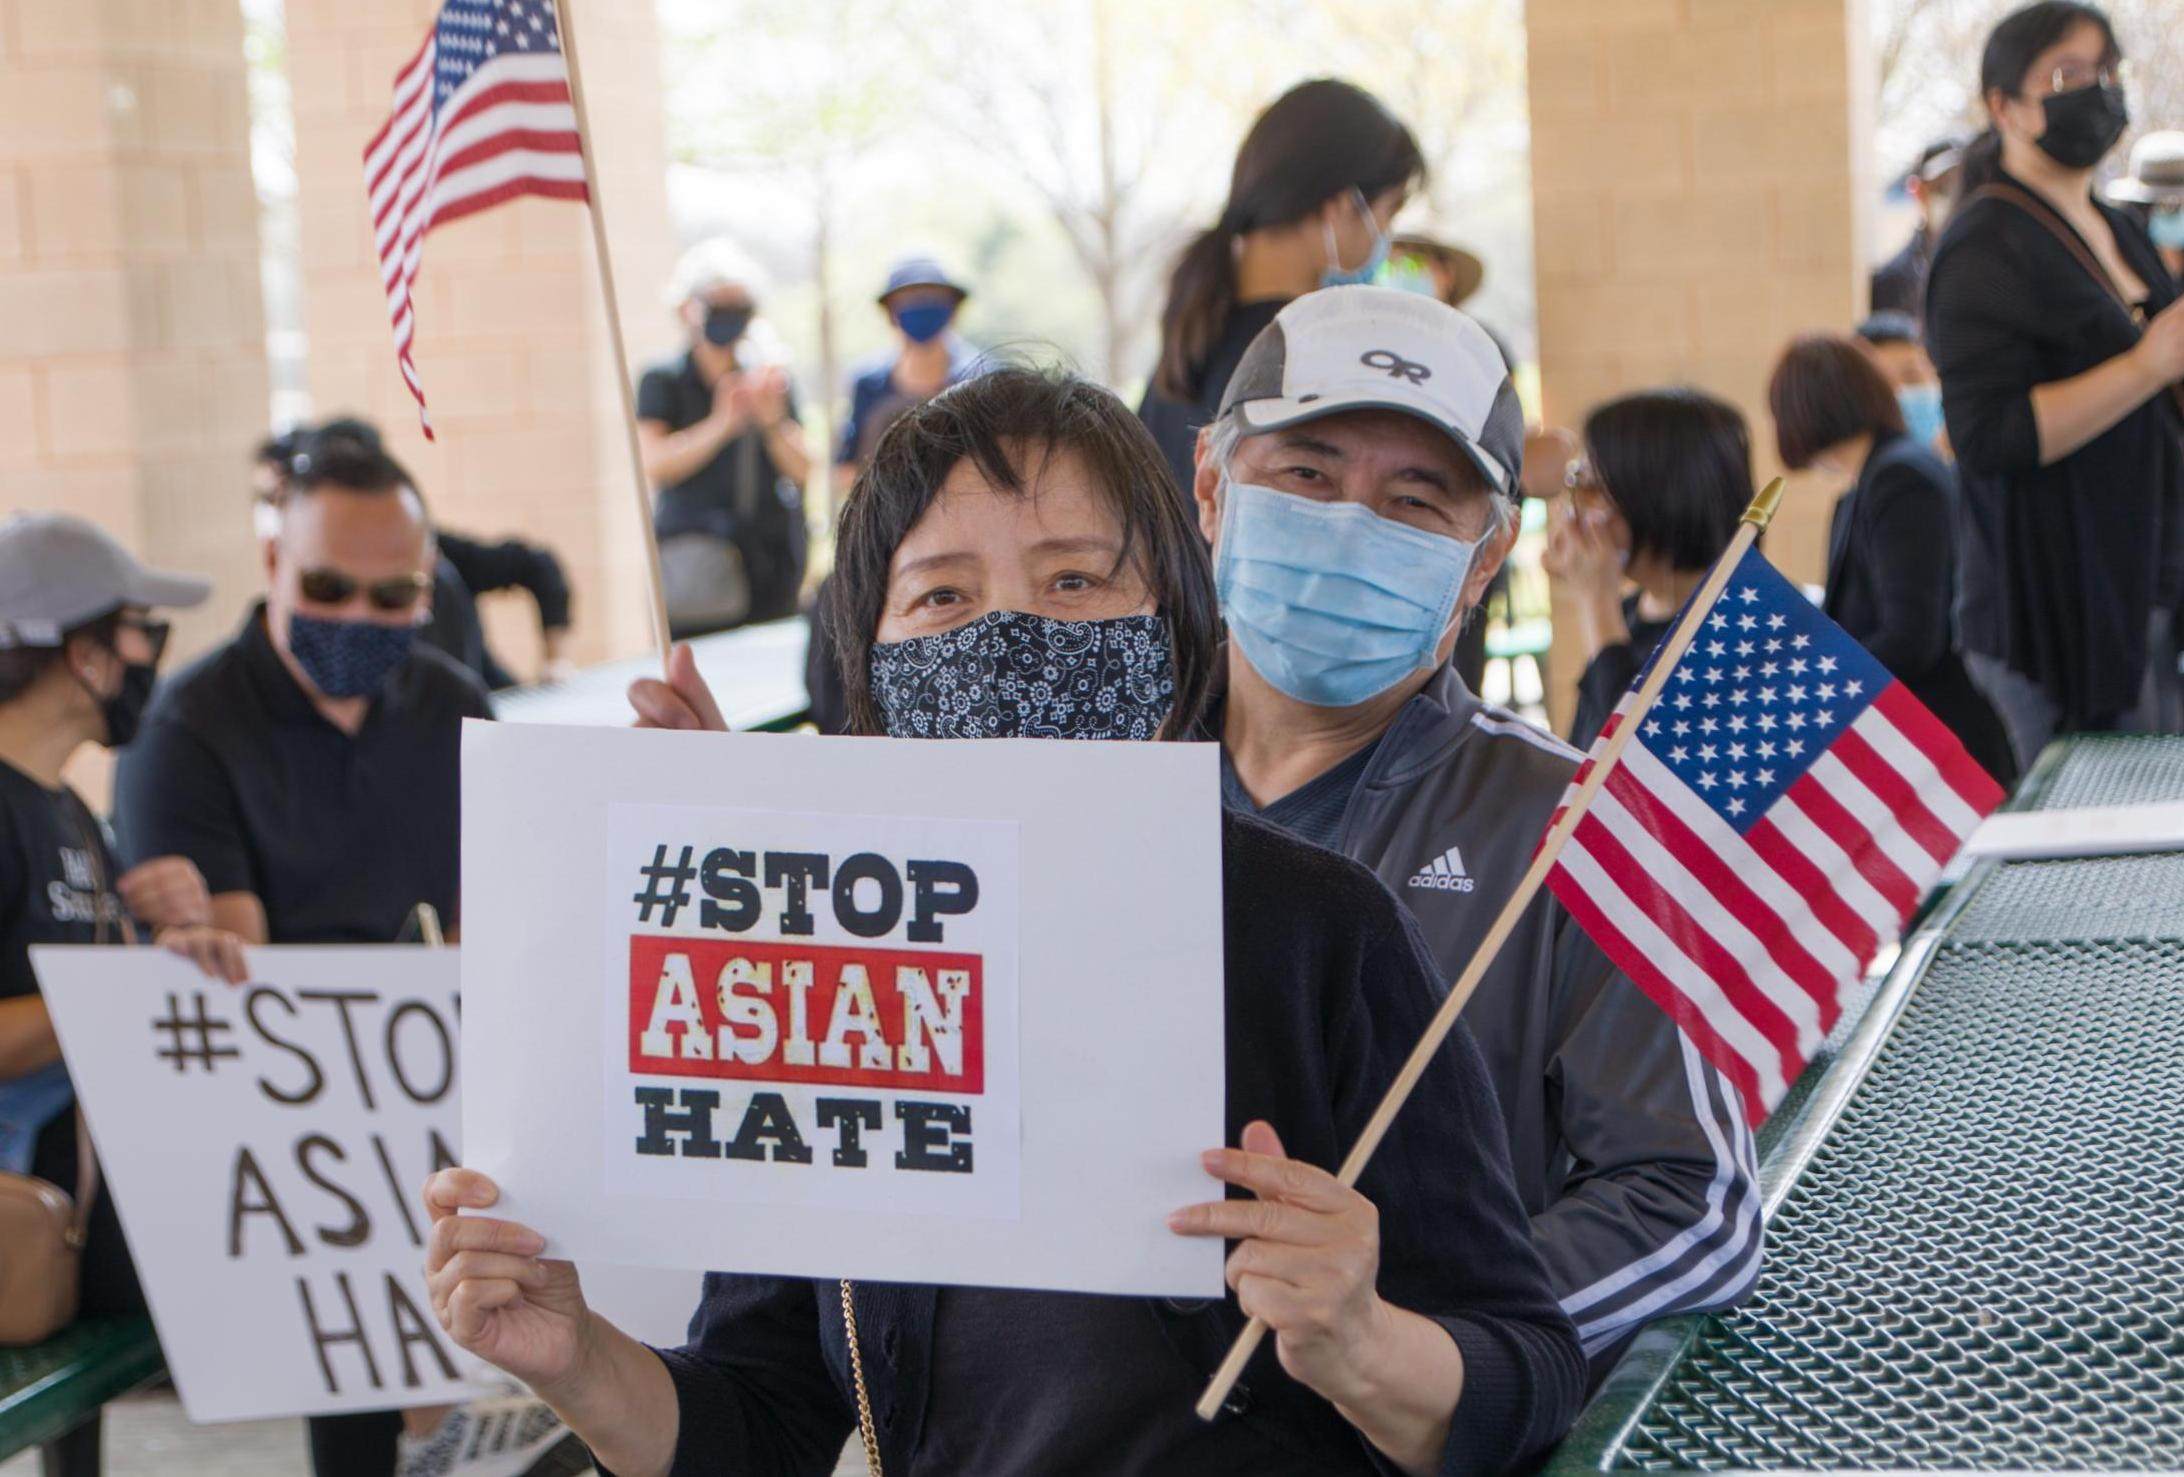 People hold signs at a Stop Asian Hate rally in Plano, Texas, on March 27. Photo: Xinhua